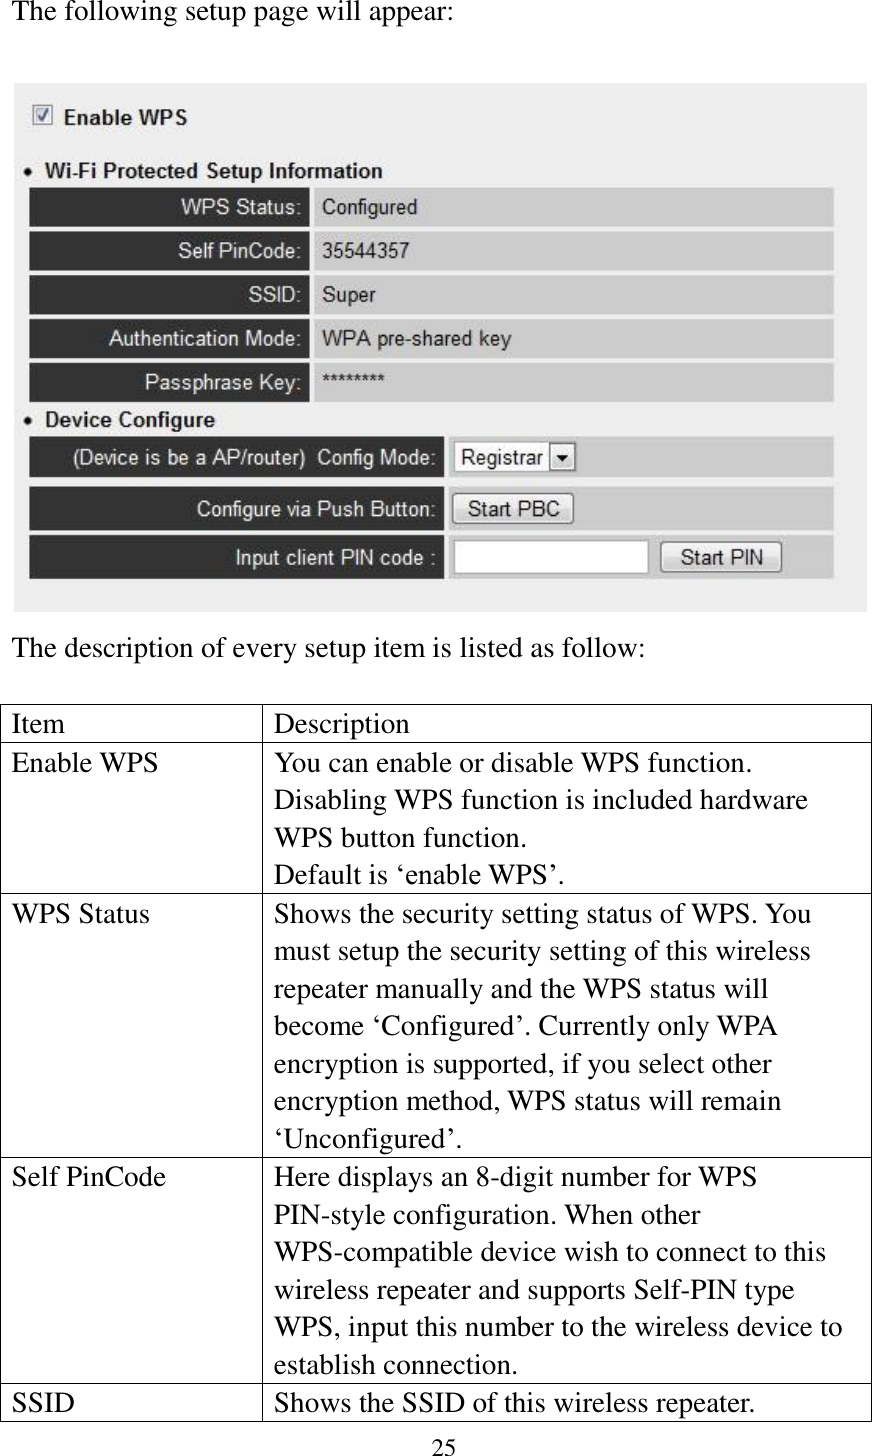 25  The following setup page will appear:   The description of every setup item is listed as follow:  Item Description Enable WPS You can enable or disable WPS function. Disabling WPS function is included hardware WPS button function.   Default is „enable WPS‟.   WPS Status Shows the security setting status of WPS. You must setup the security setting of this wireless repeater manually and the WPS status will become „Configured‟. Currently only WPA encryption is supported, if you select other encryption method, WPS status will remain „Unconfigured‟.  Self PinCode Here displays an 8-digit number for WPS PIN-style configuration. When other WPS-compatible device wish to connect to this wireless repeater and supports Self-PIN type WPS, input this number to the wireless device to establish connection. SSID Shows the SSID of this wireless repeater. 